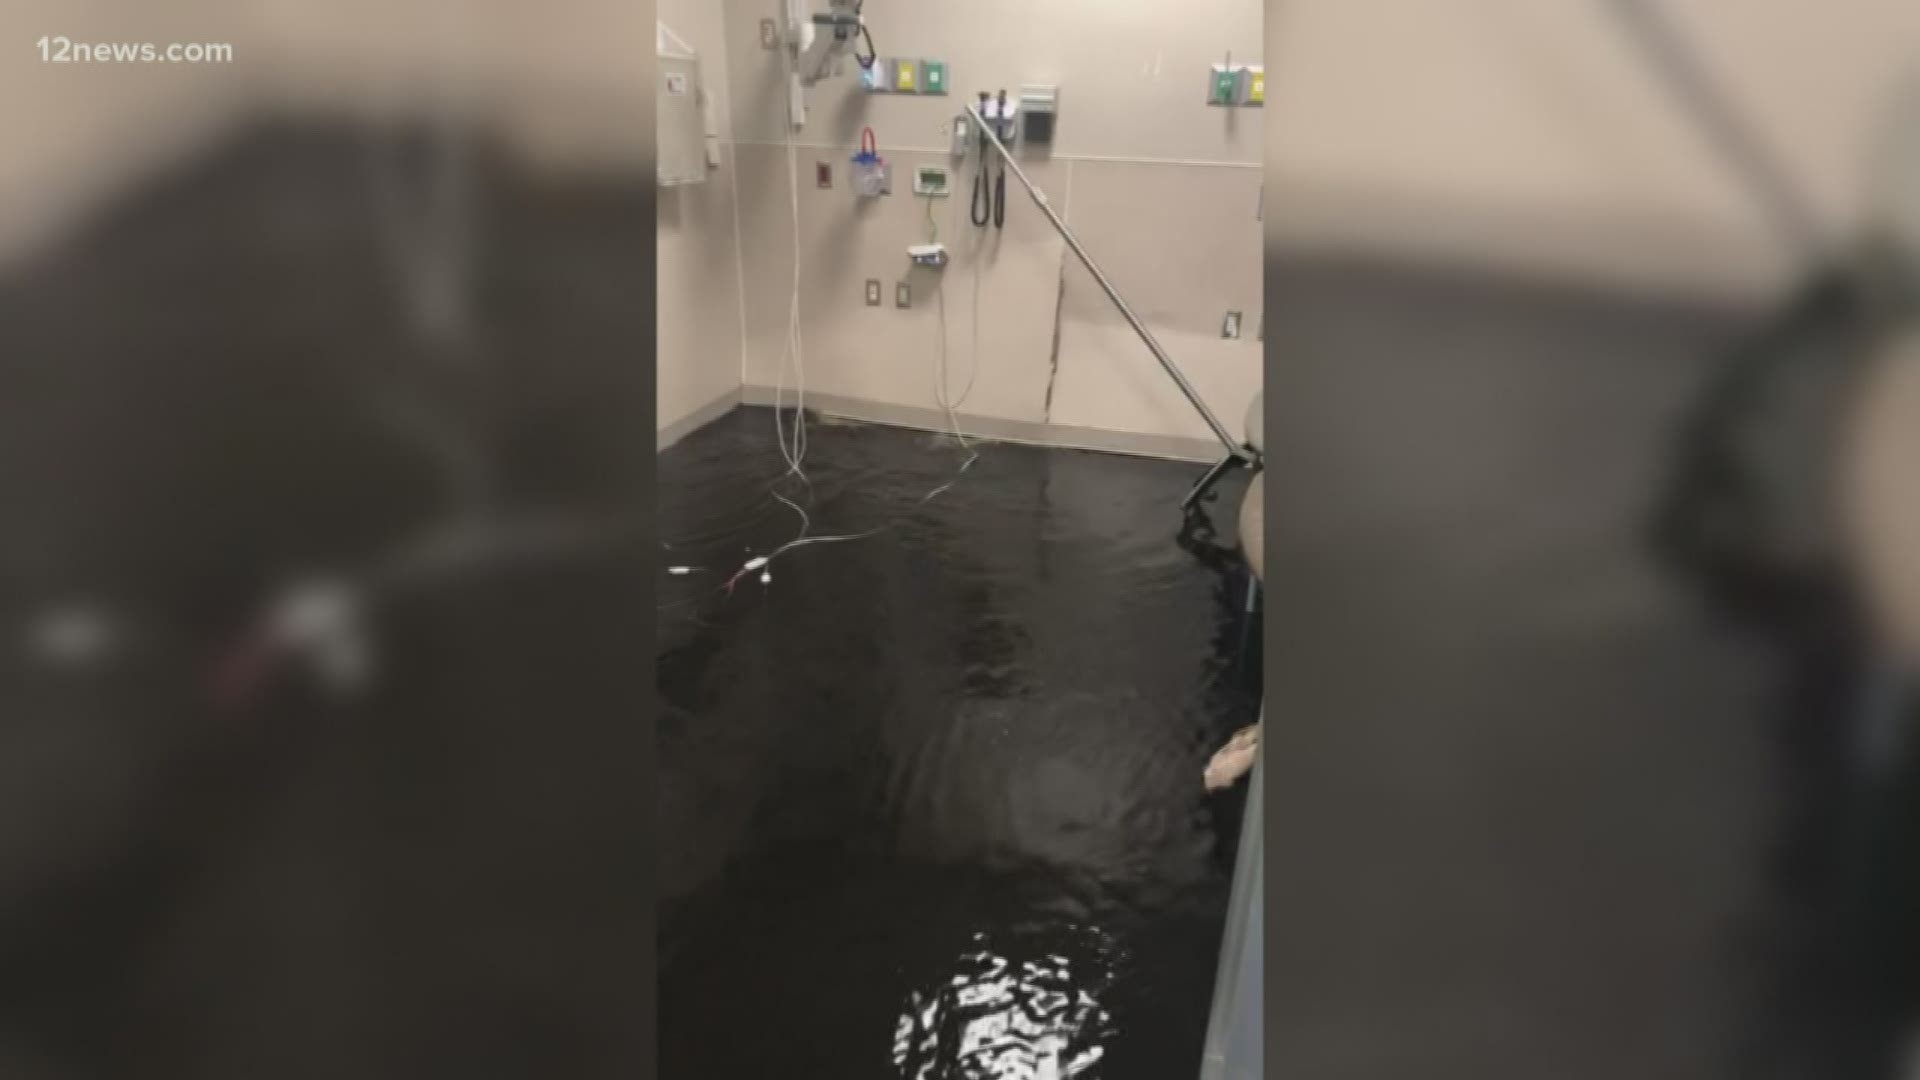 A pipe burst Friday afternoon, flooding the emergency department at Banner - University Medical Center Phoenix.